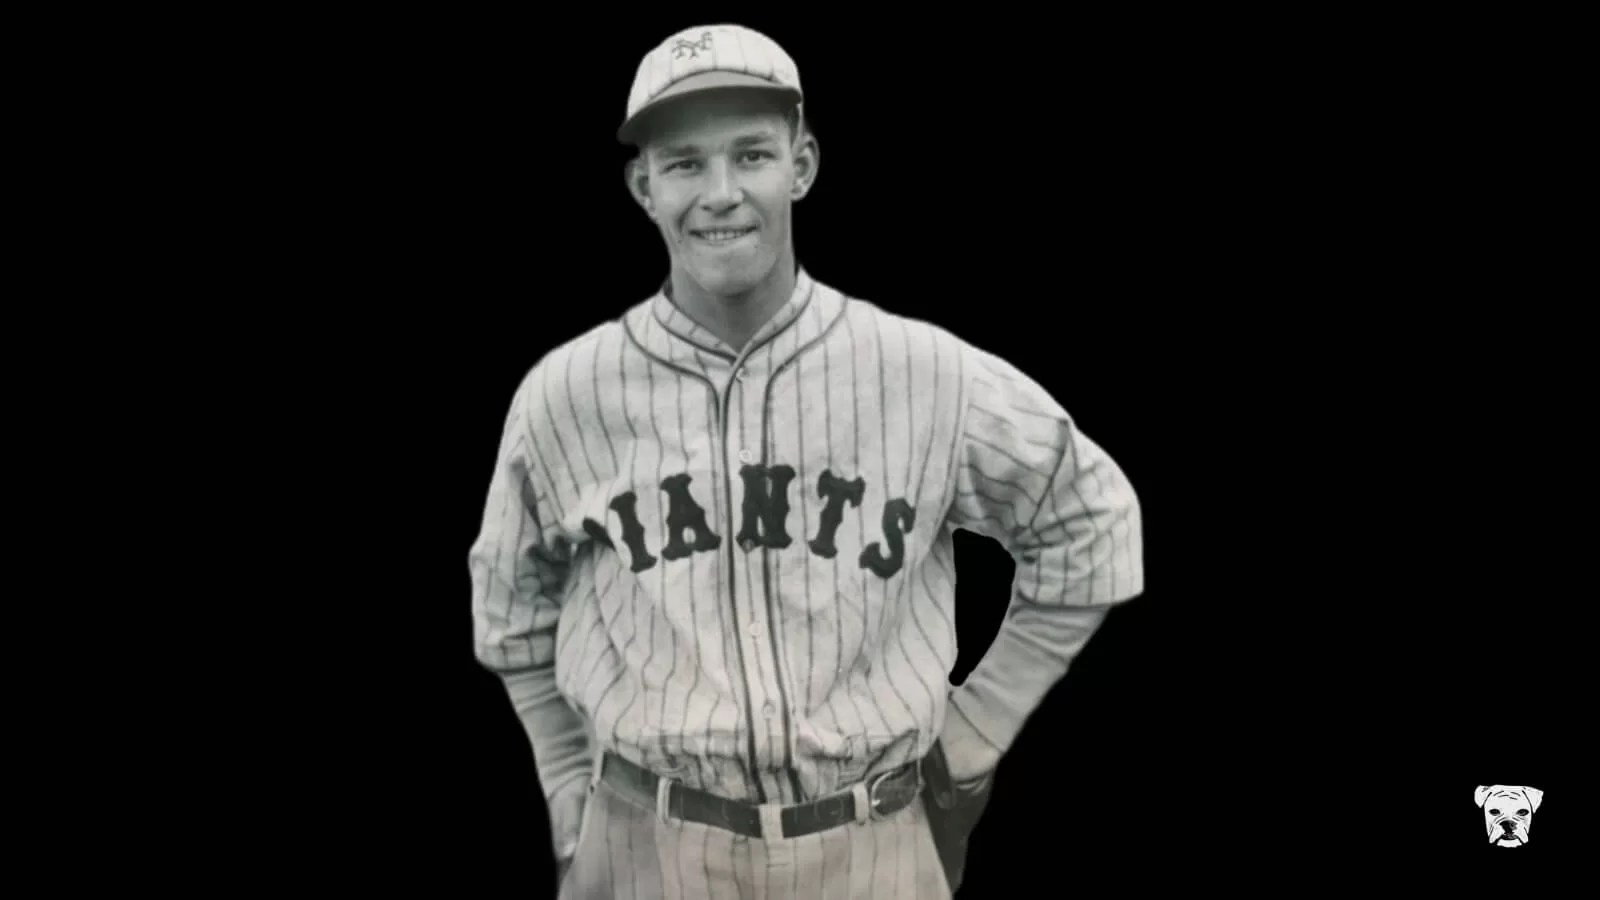 Mel Ott and the youngest MLB rookies ever